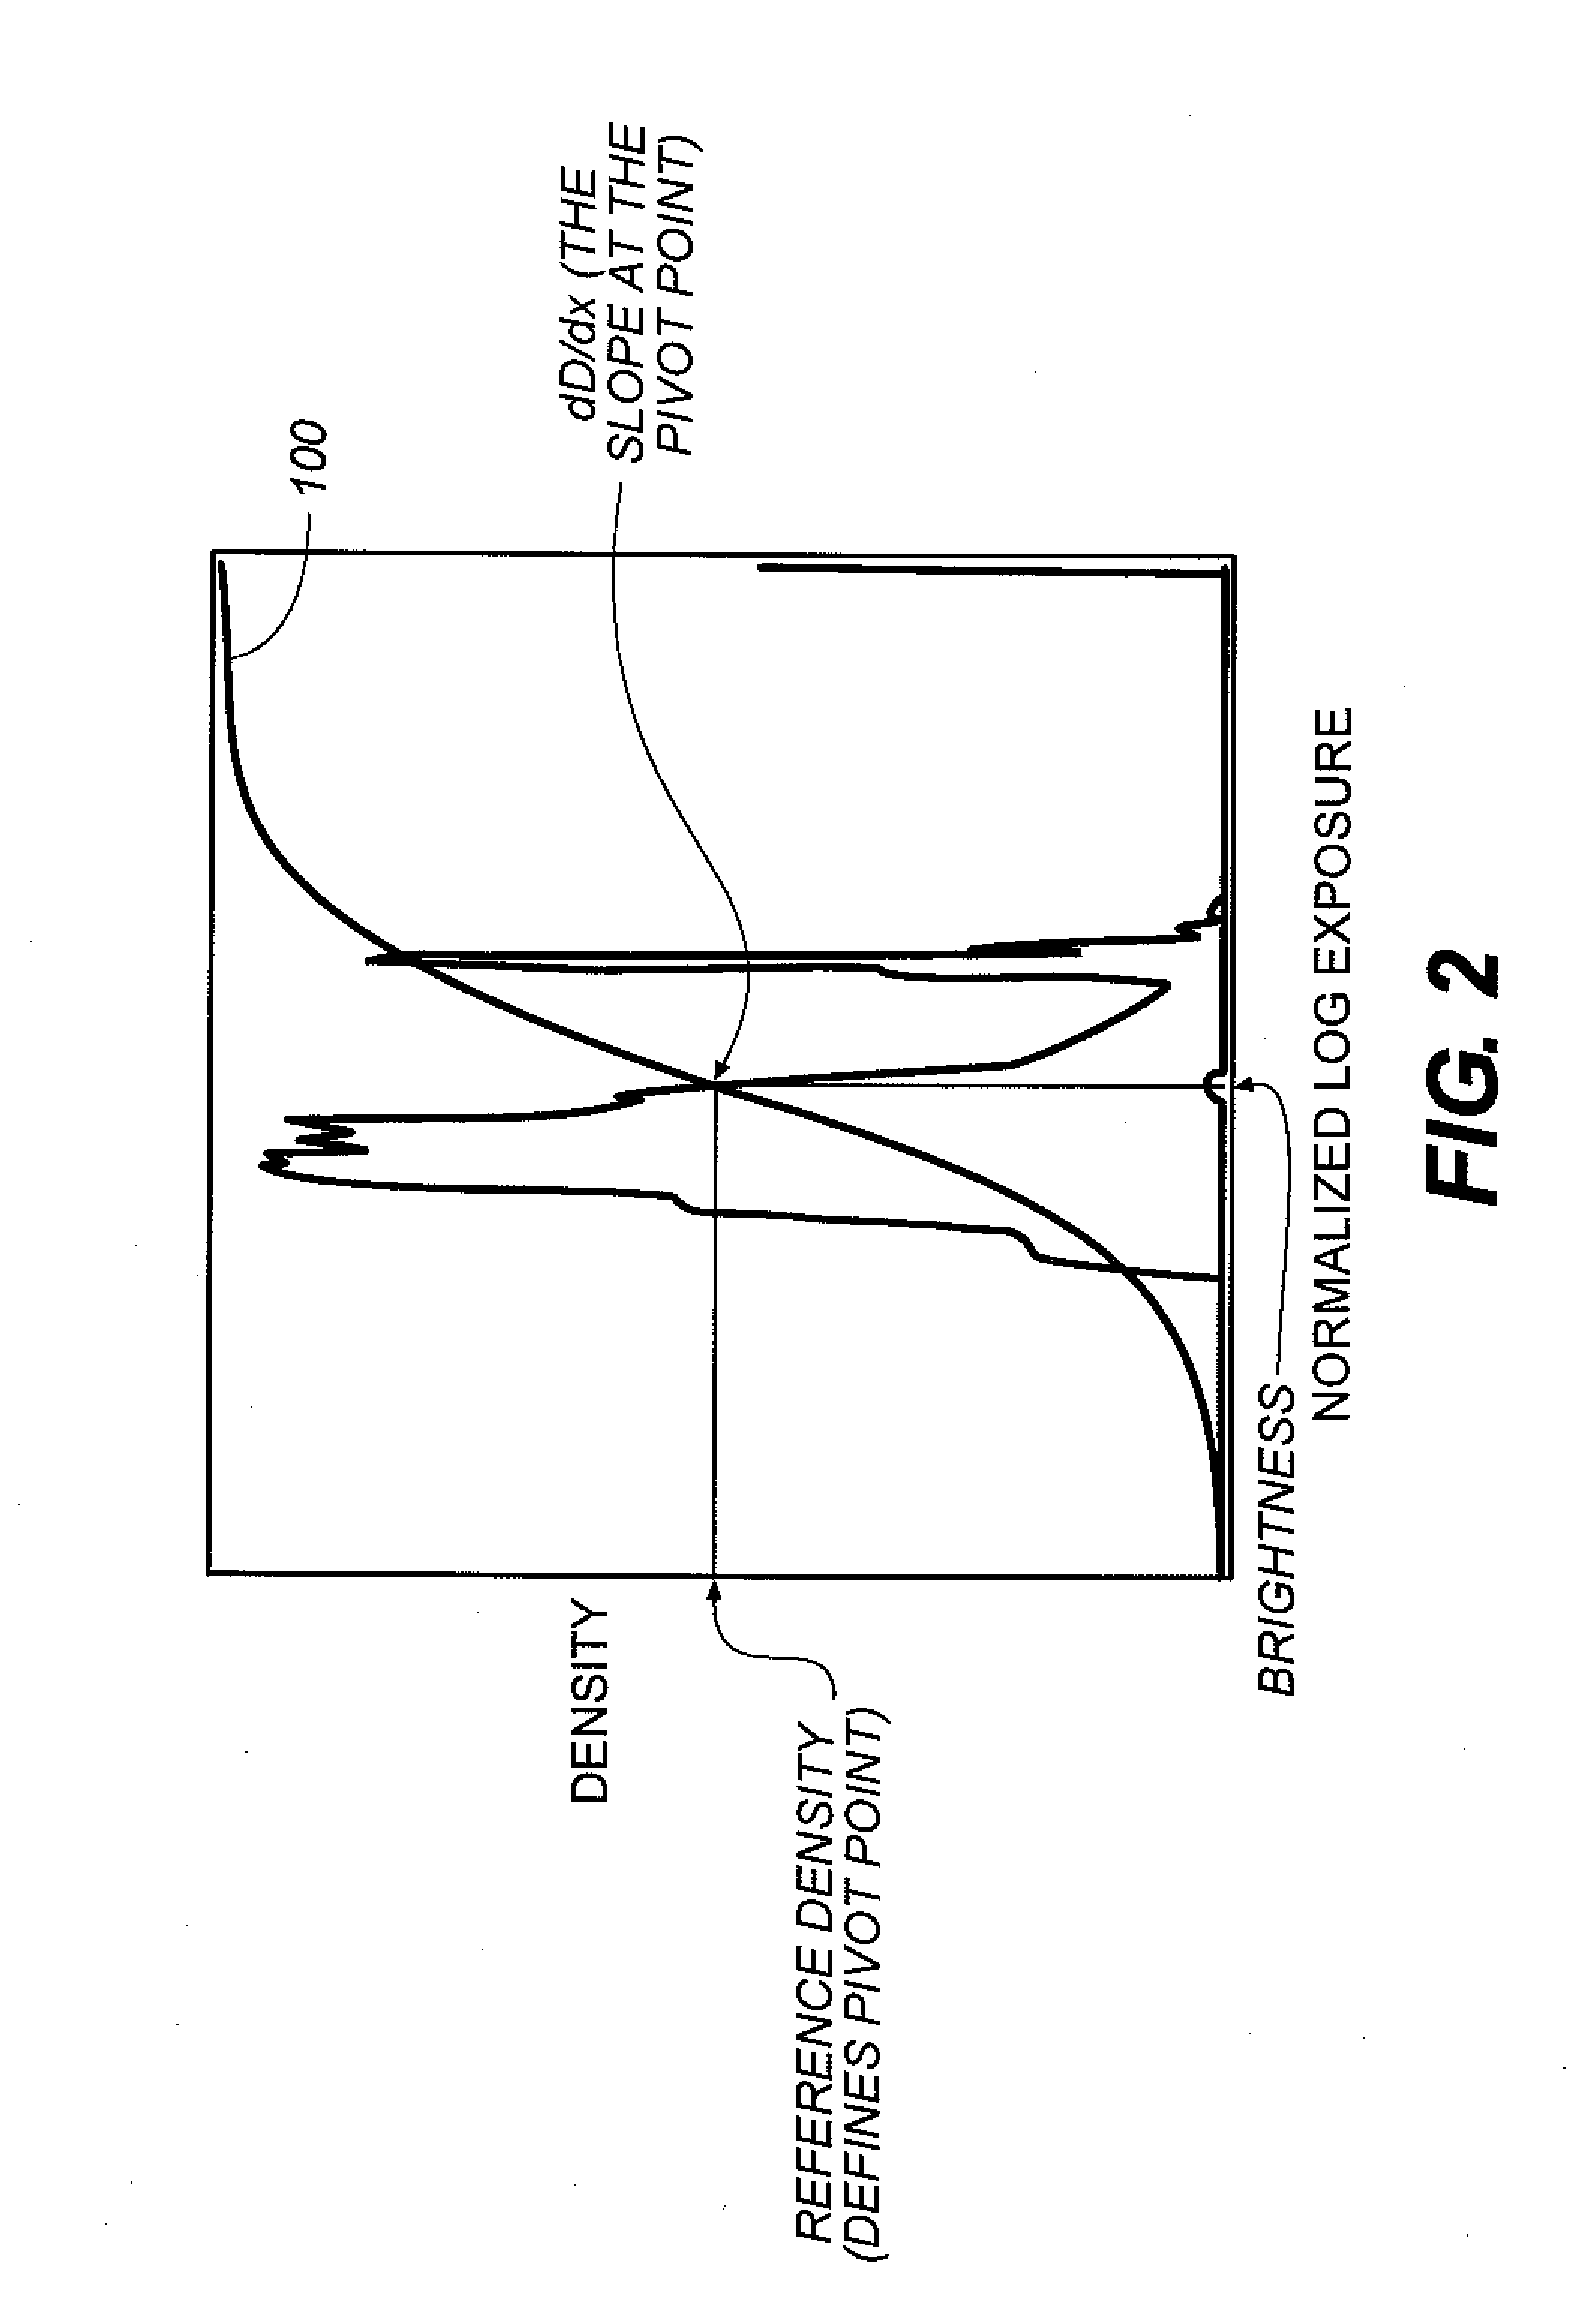 Method for rendering digital radiographic images for display based on independent control of fundamental image of quality parameters